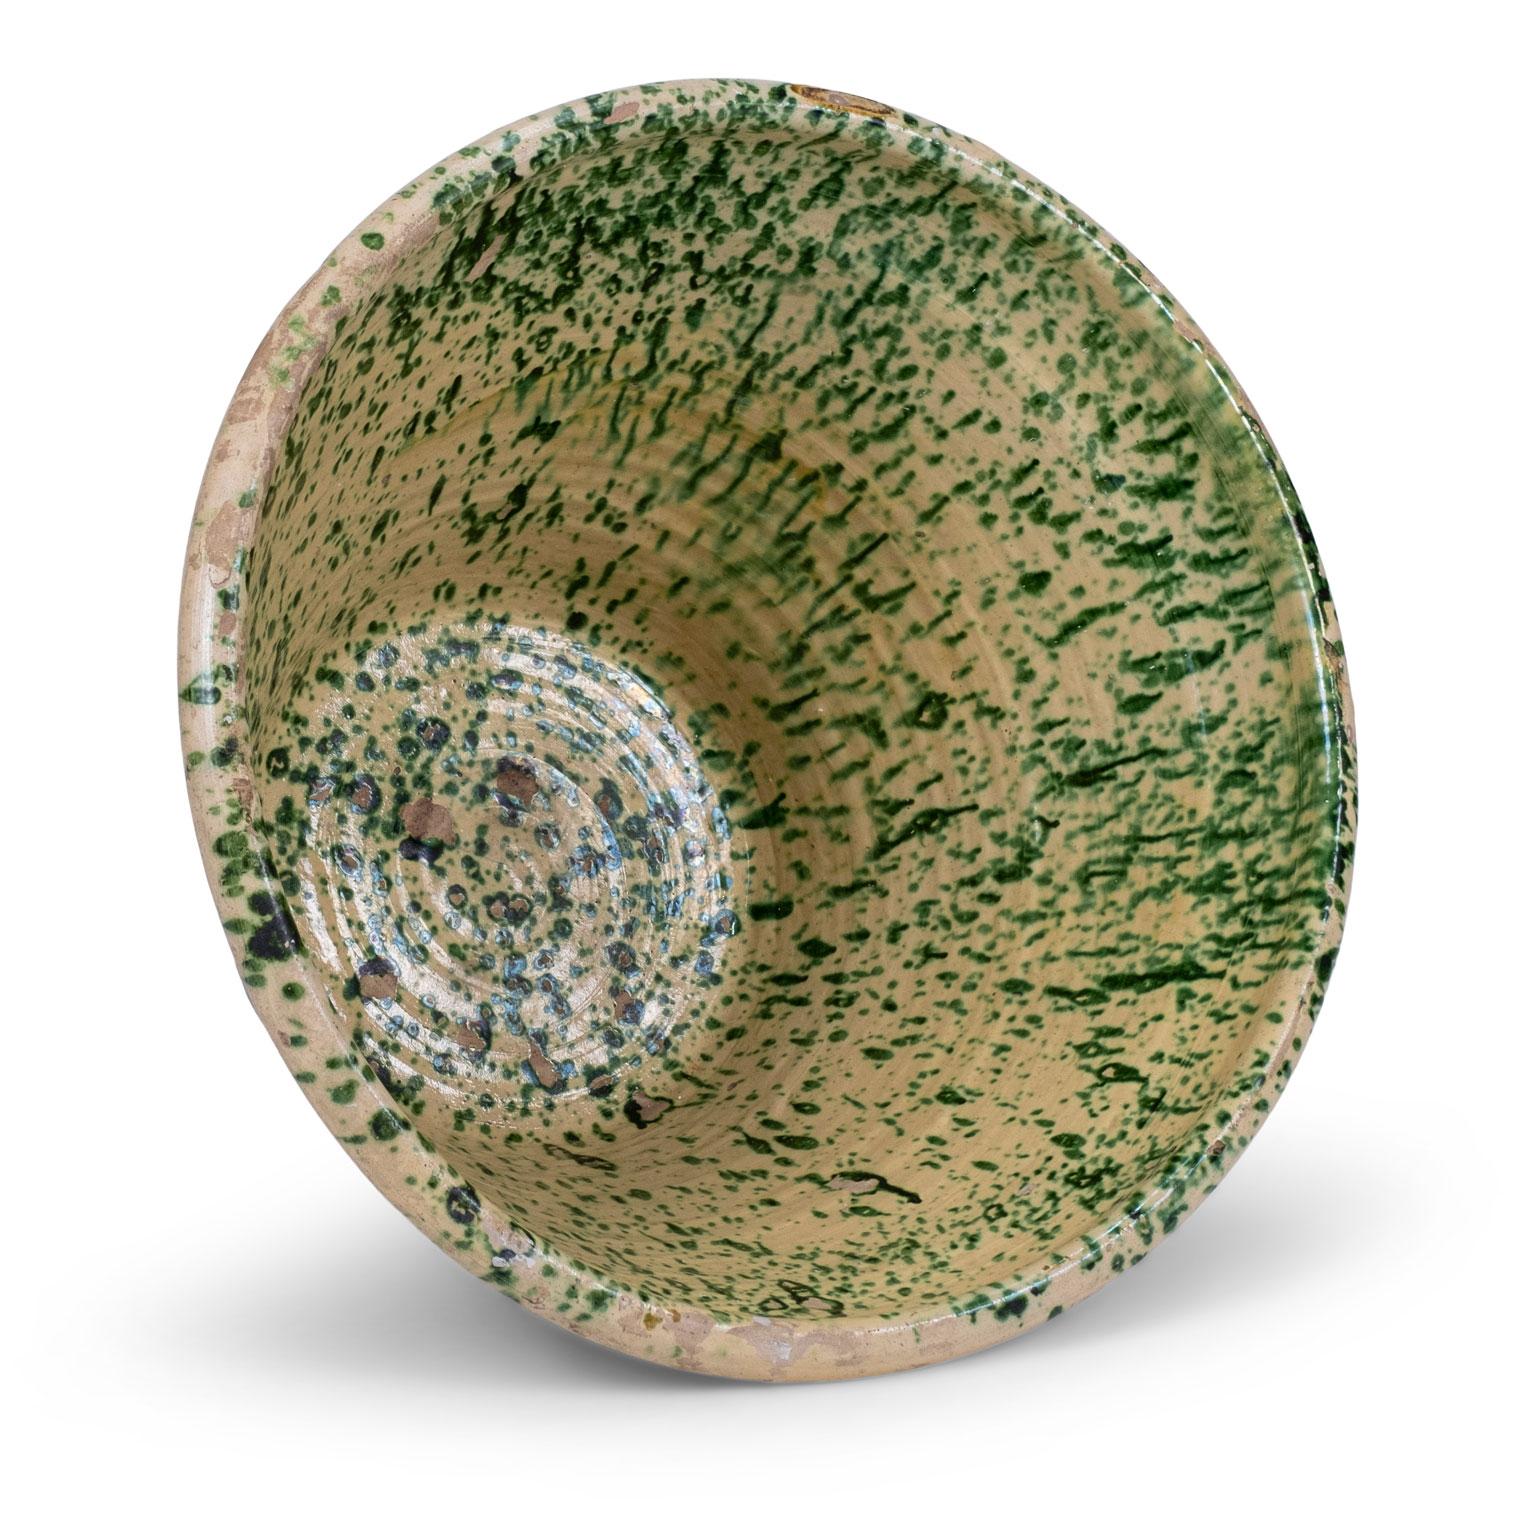 Large colorful glazed terracotta passata bowl from southern Italy (Puglia). This rustic 19th century terracotta bowl was used in the Italian countryside to make tomato passata. Handcrafted and glazed in a pesto-color green pattern over butter-cream.